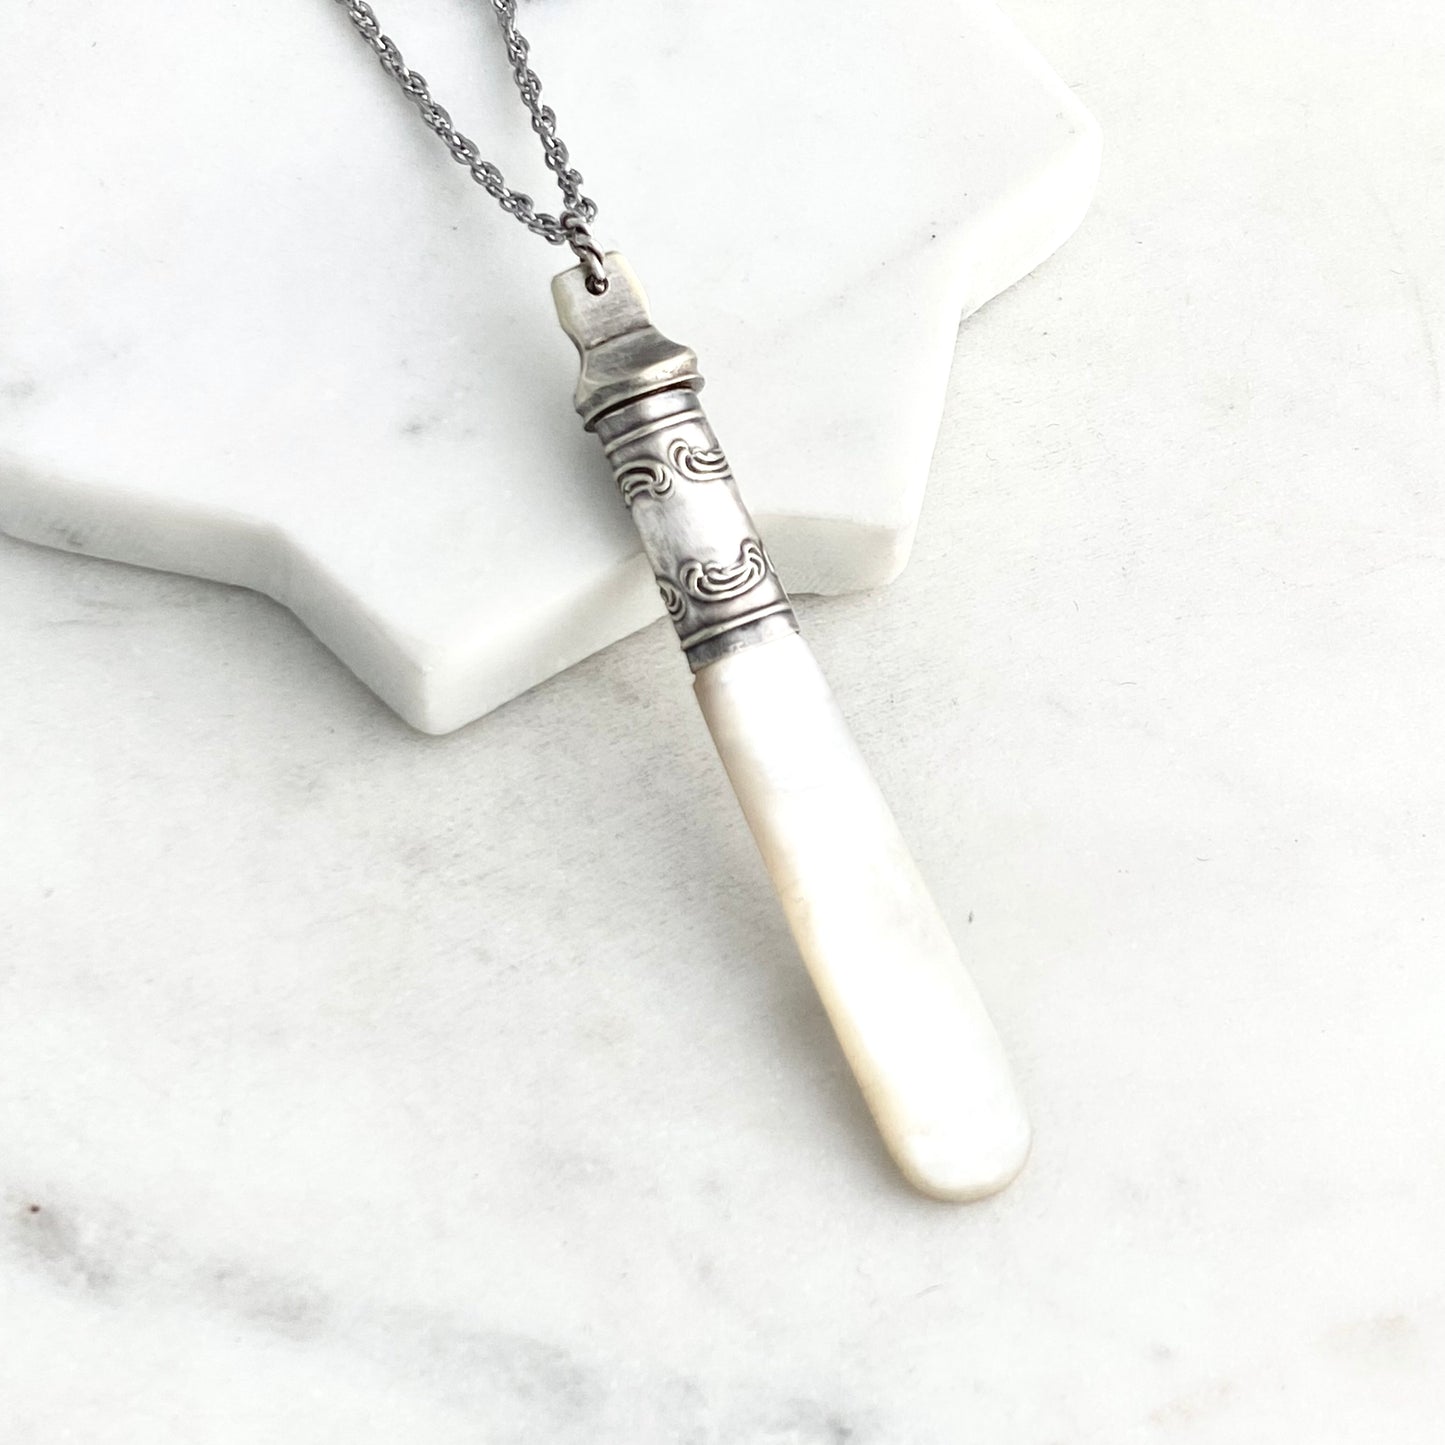 Mother of Pearl, Reclaimed Silverware Necklace, Vintage Spoon Jewelry Necklaces callistafaye   